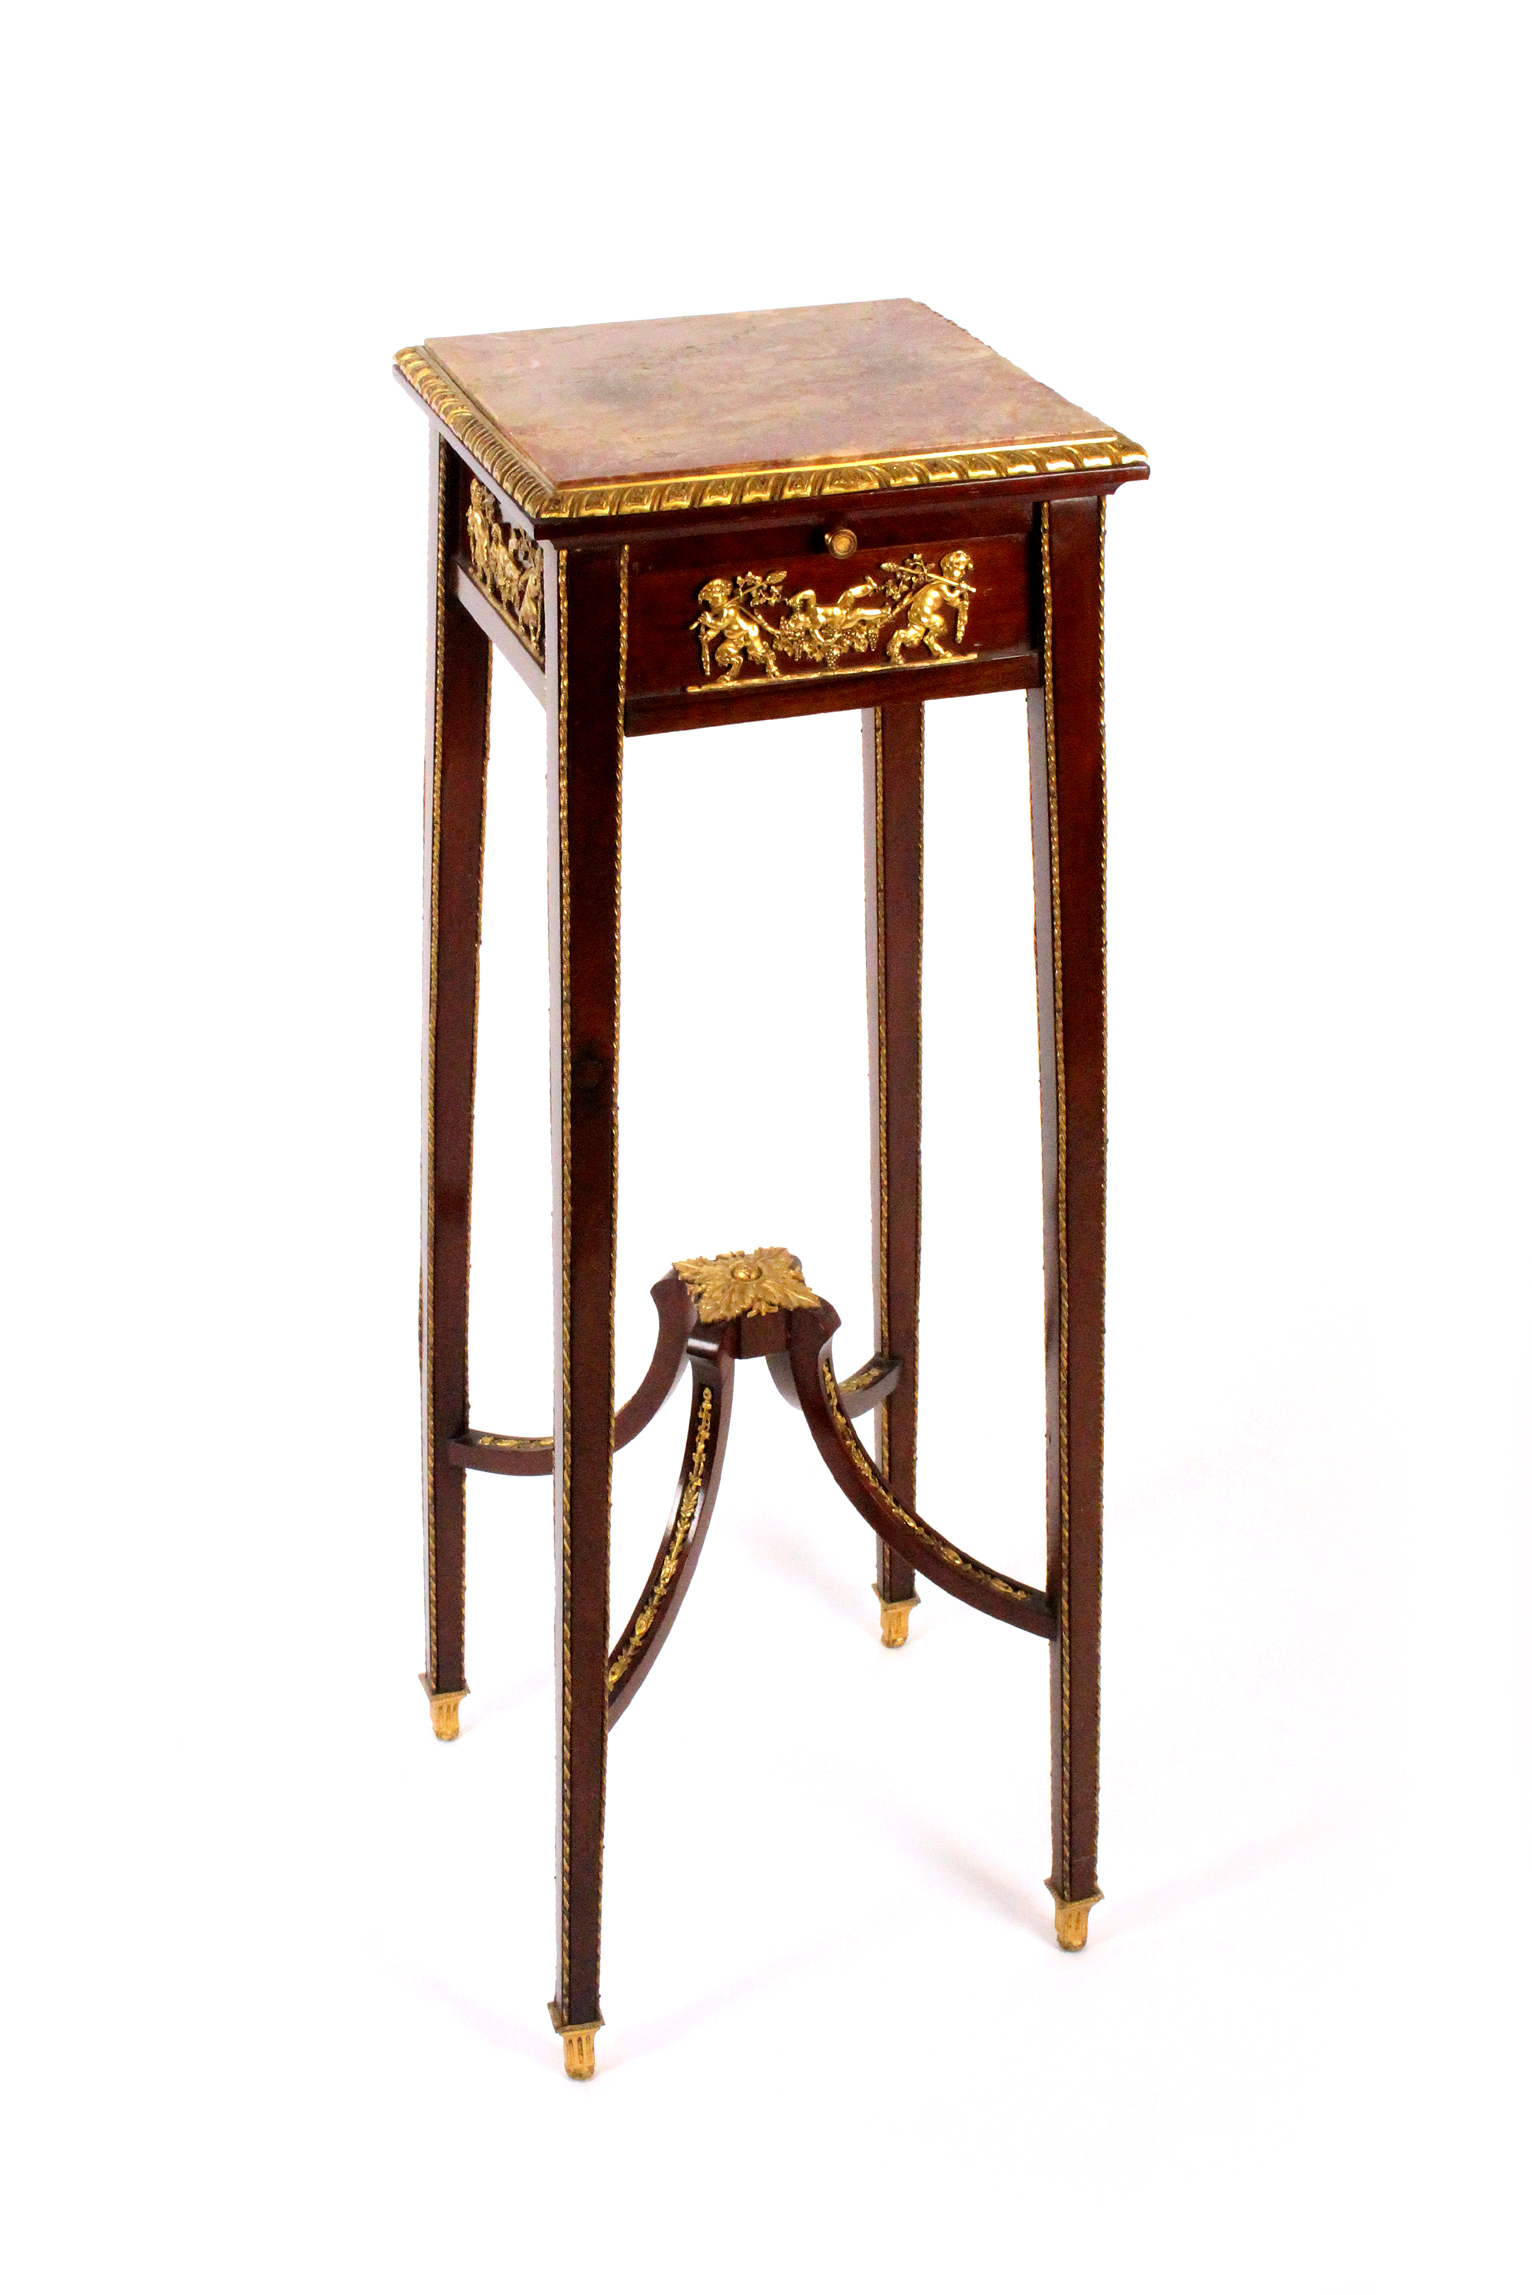 An early 20th century Louis XVI style urn stand, the inset marble top over a gilt metal mounted